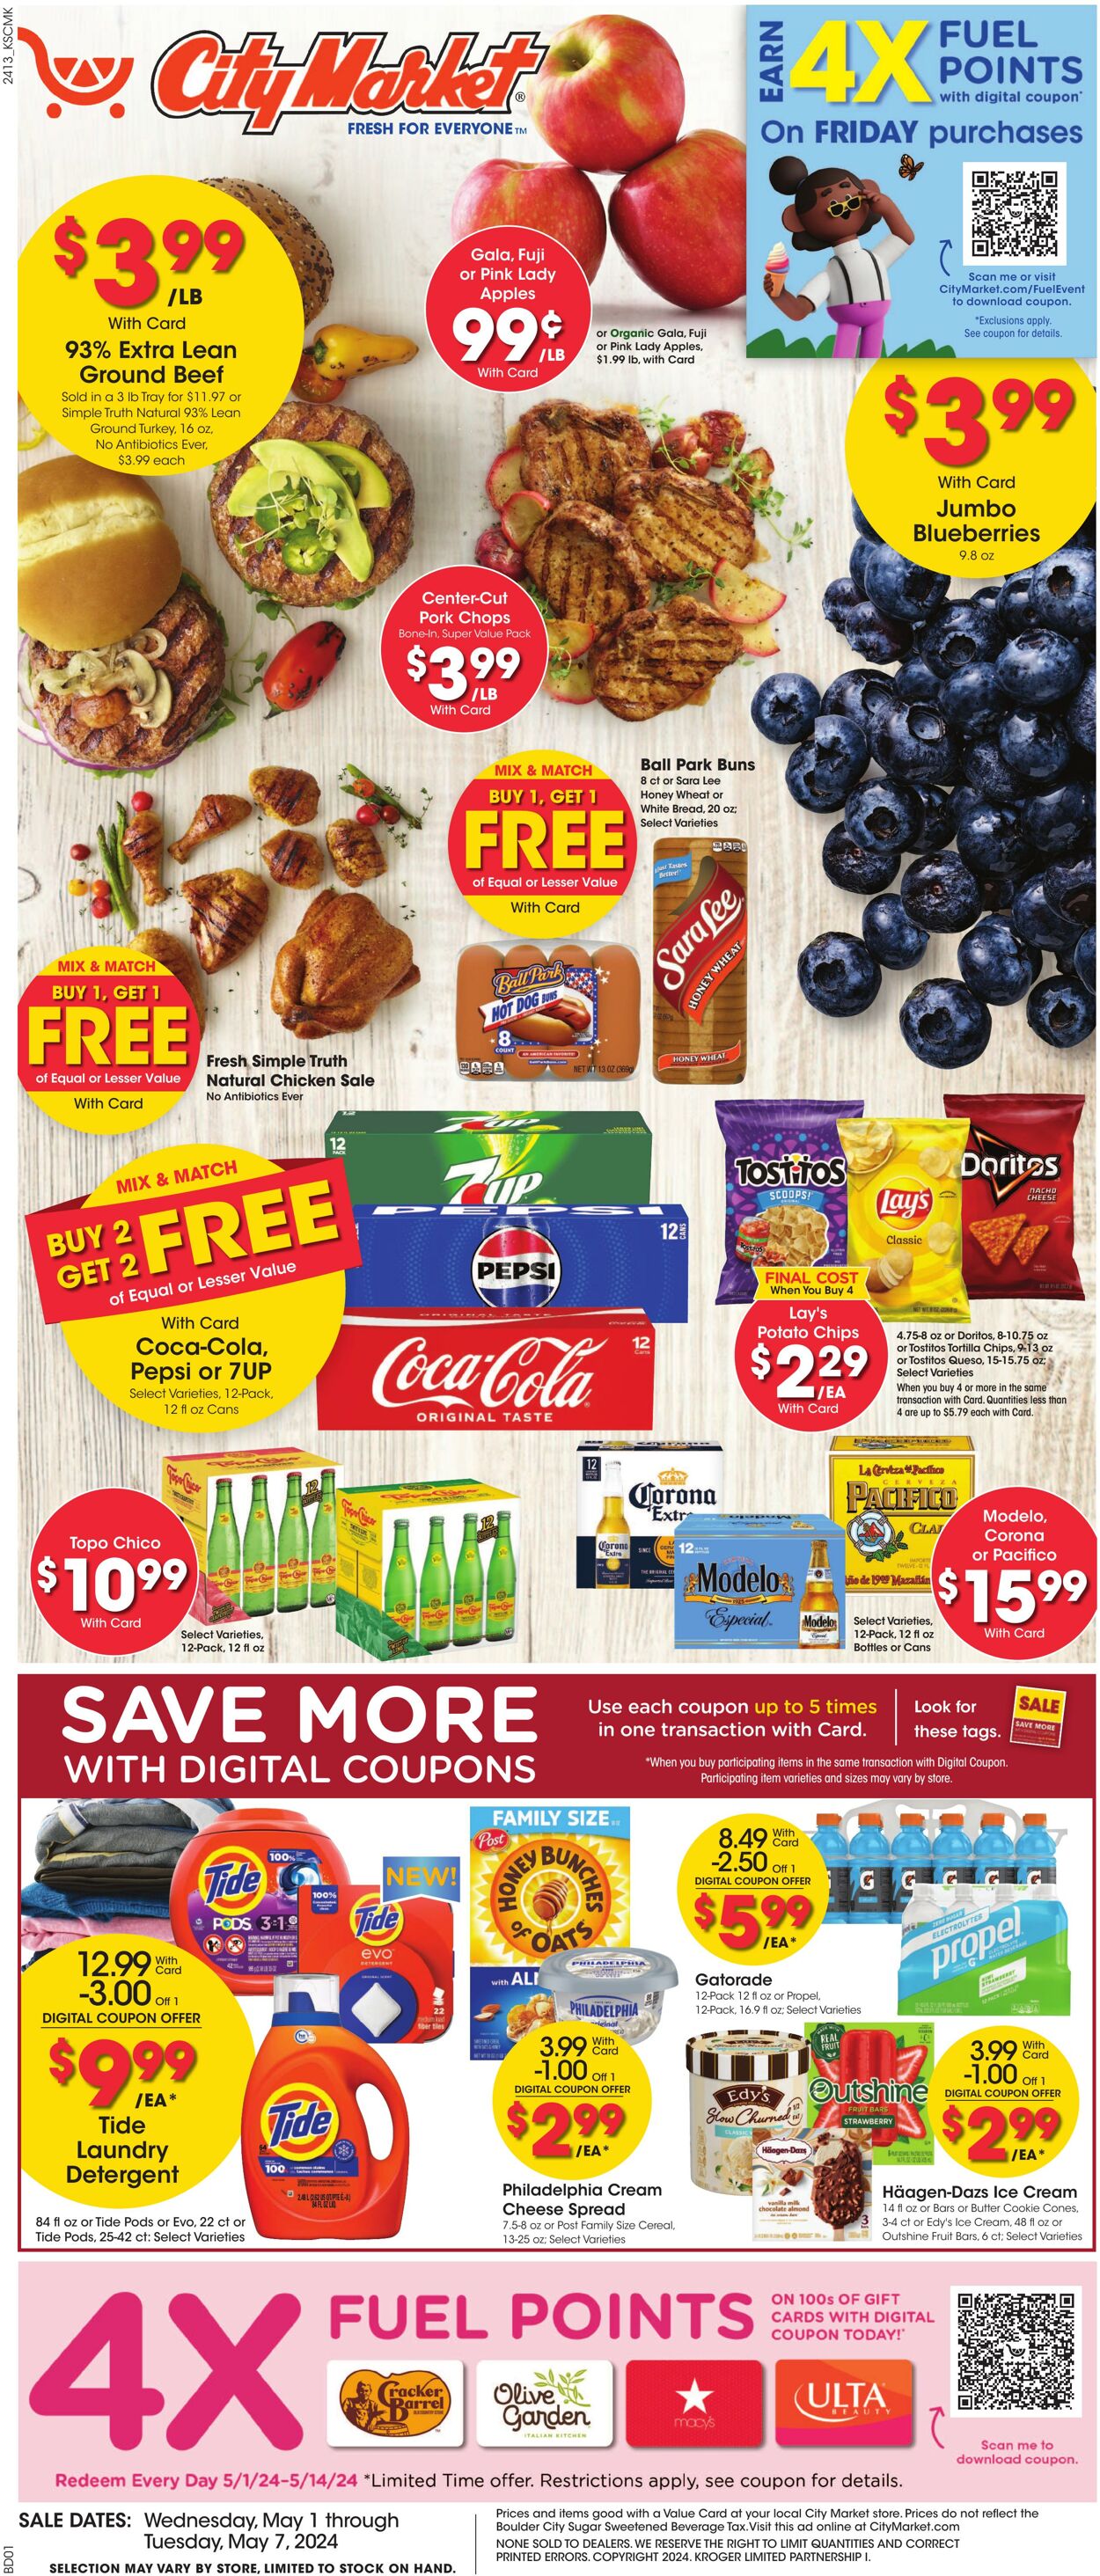 City Market Promotional weekly ads